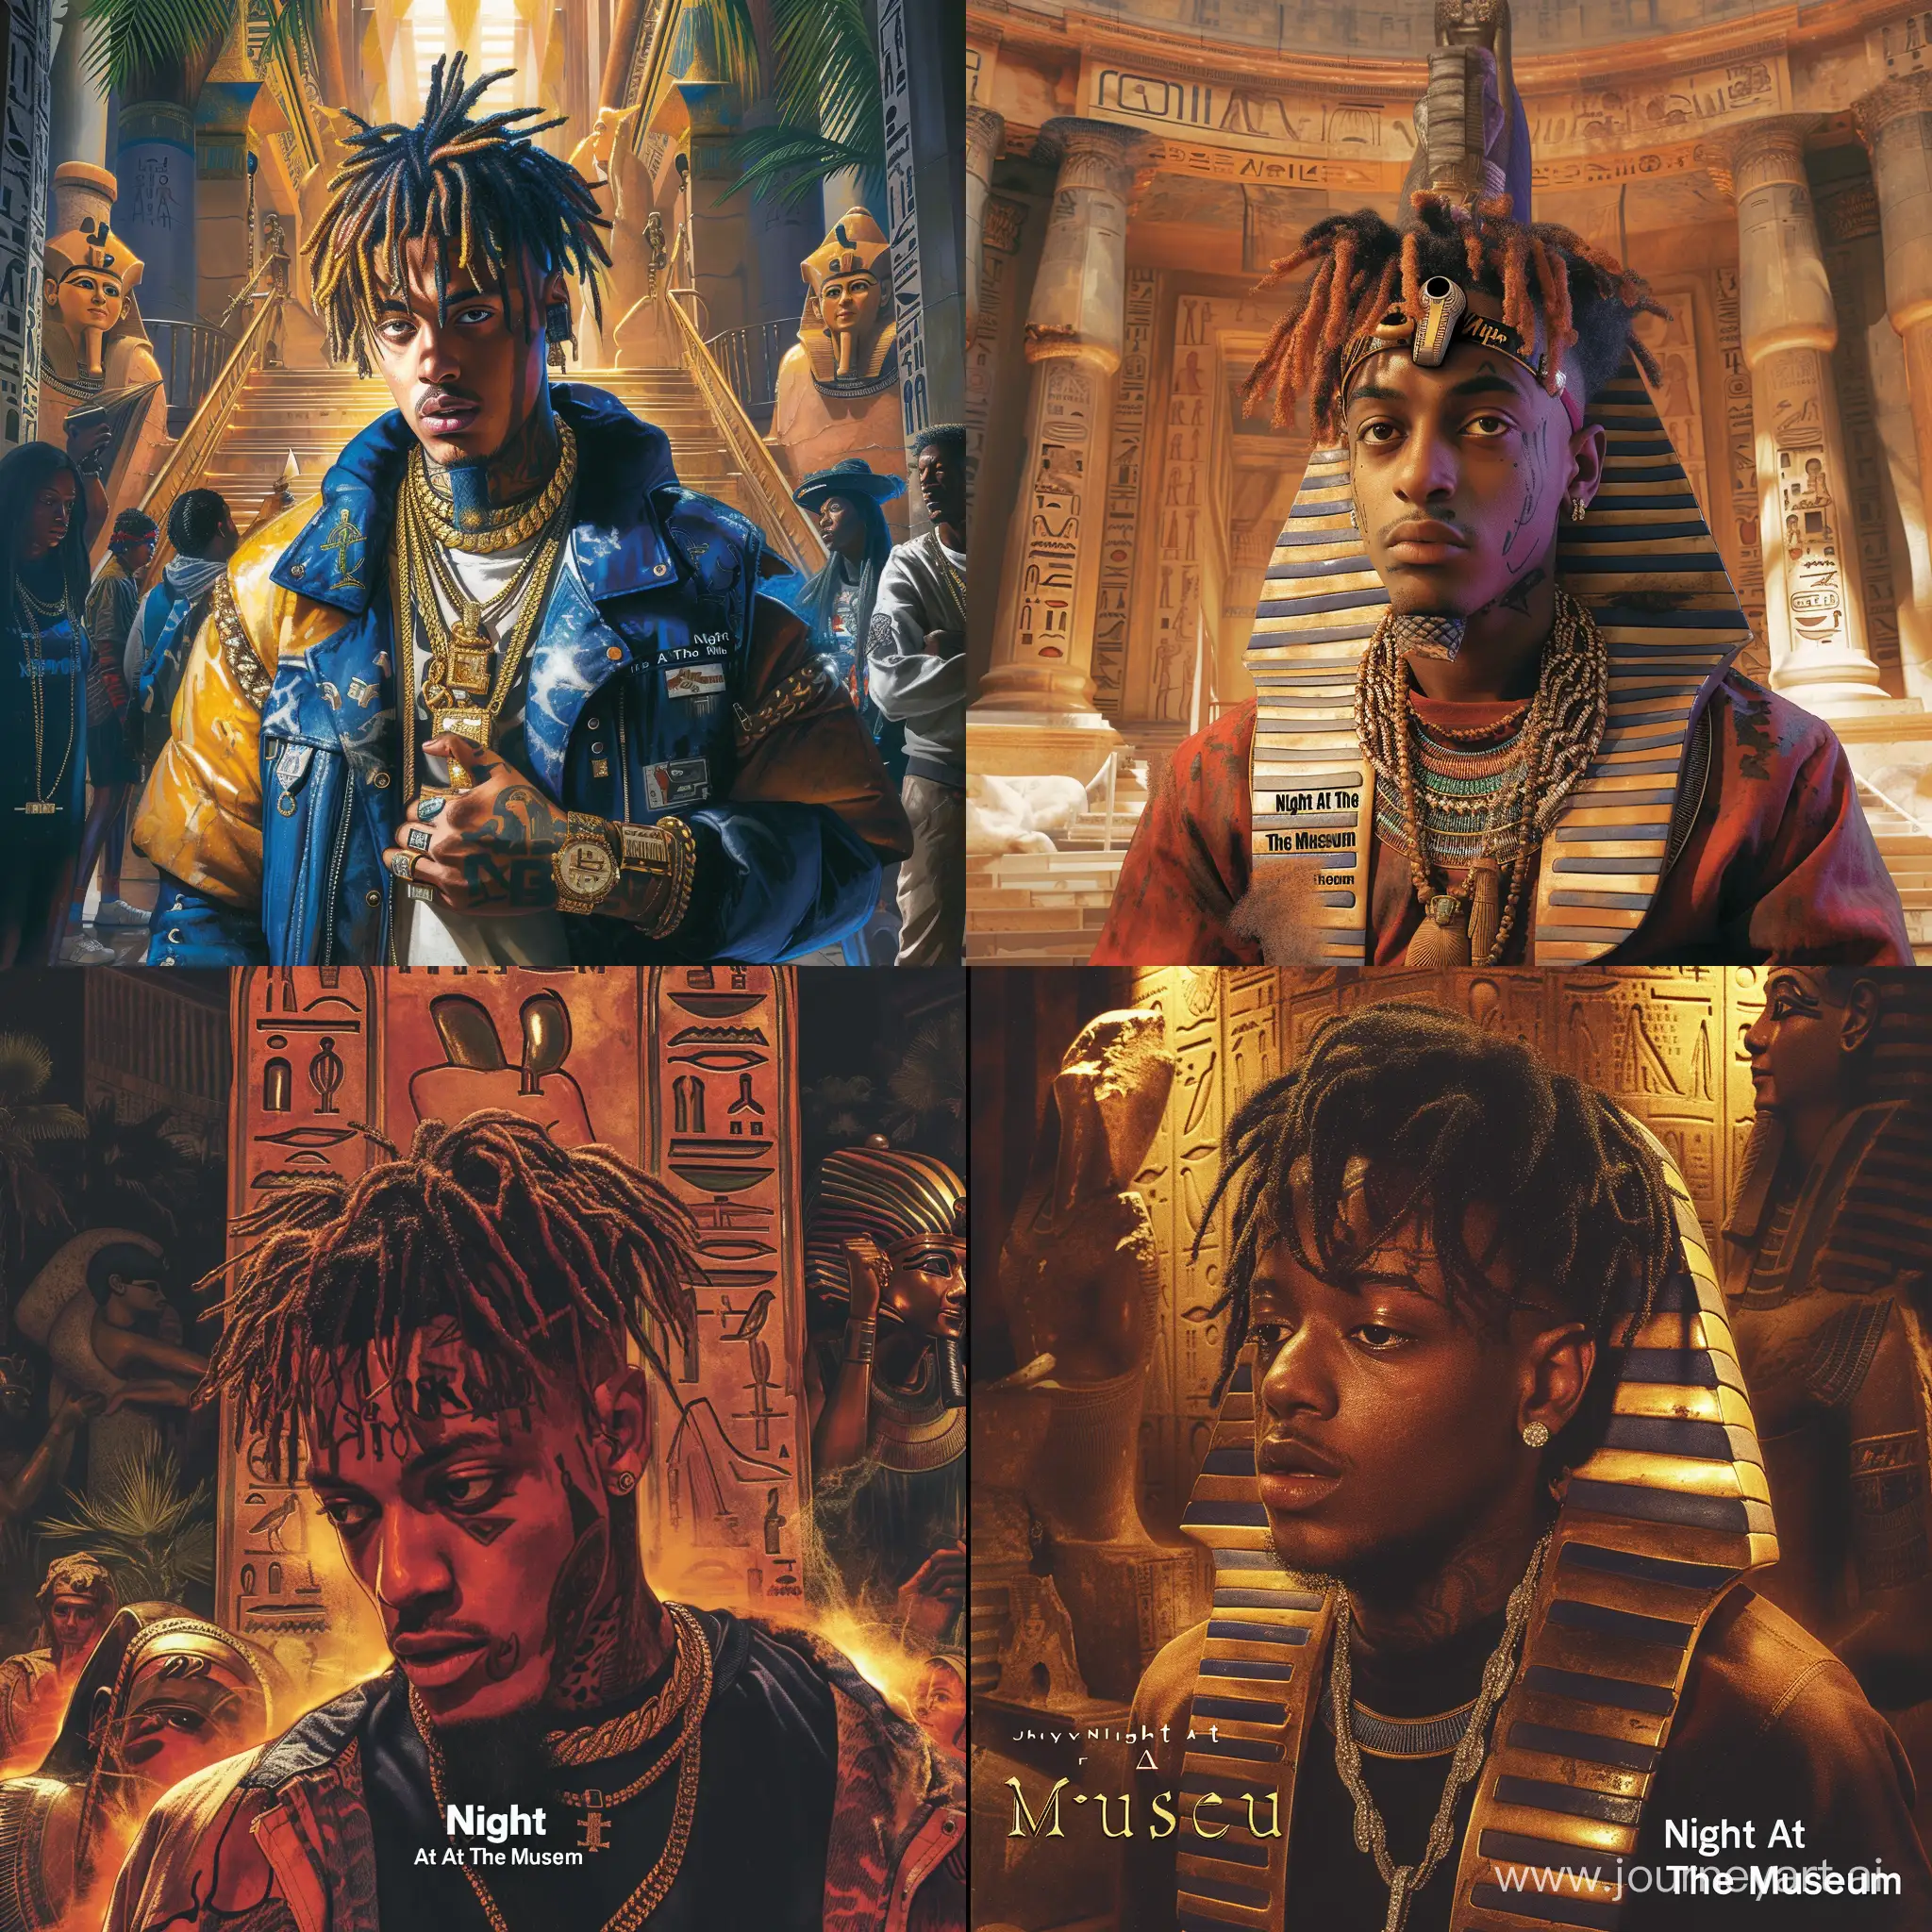 Juice-WRLD-Album-Cover-in-Night-At-The-Museum-Escape-Scene-with-Ancient-Egypt-Pharaohs